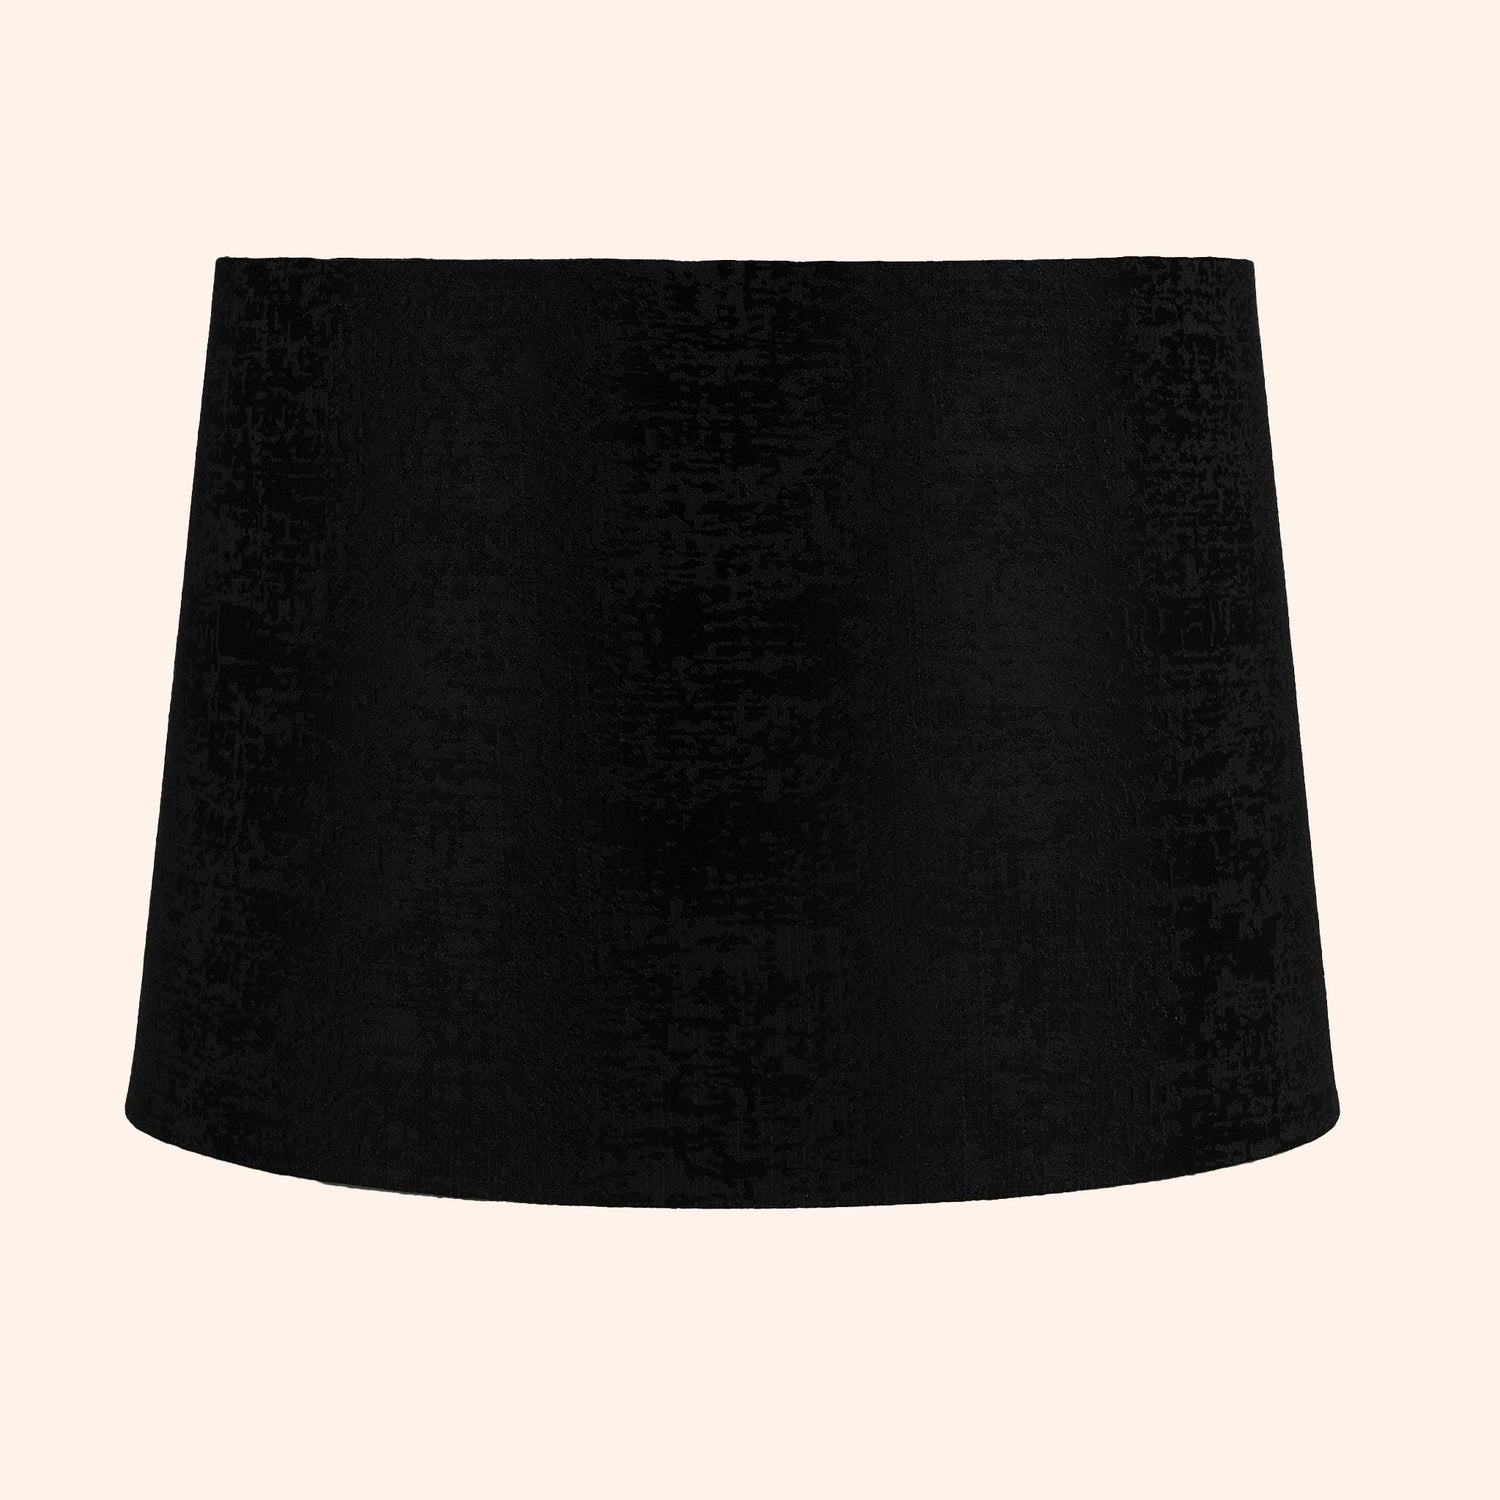 Tapered drum shape lamp shade in black color.